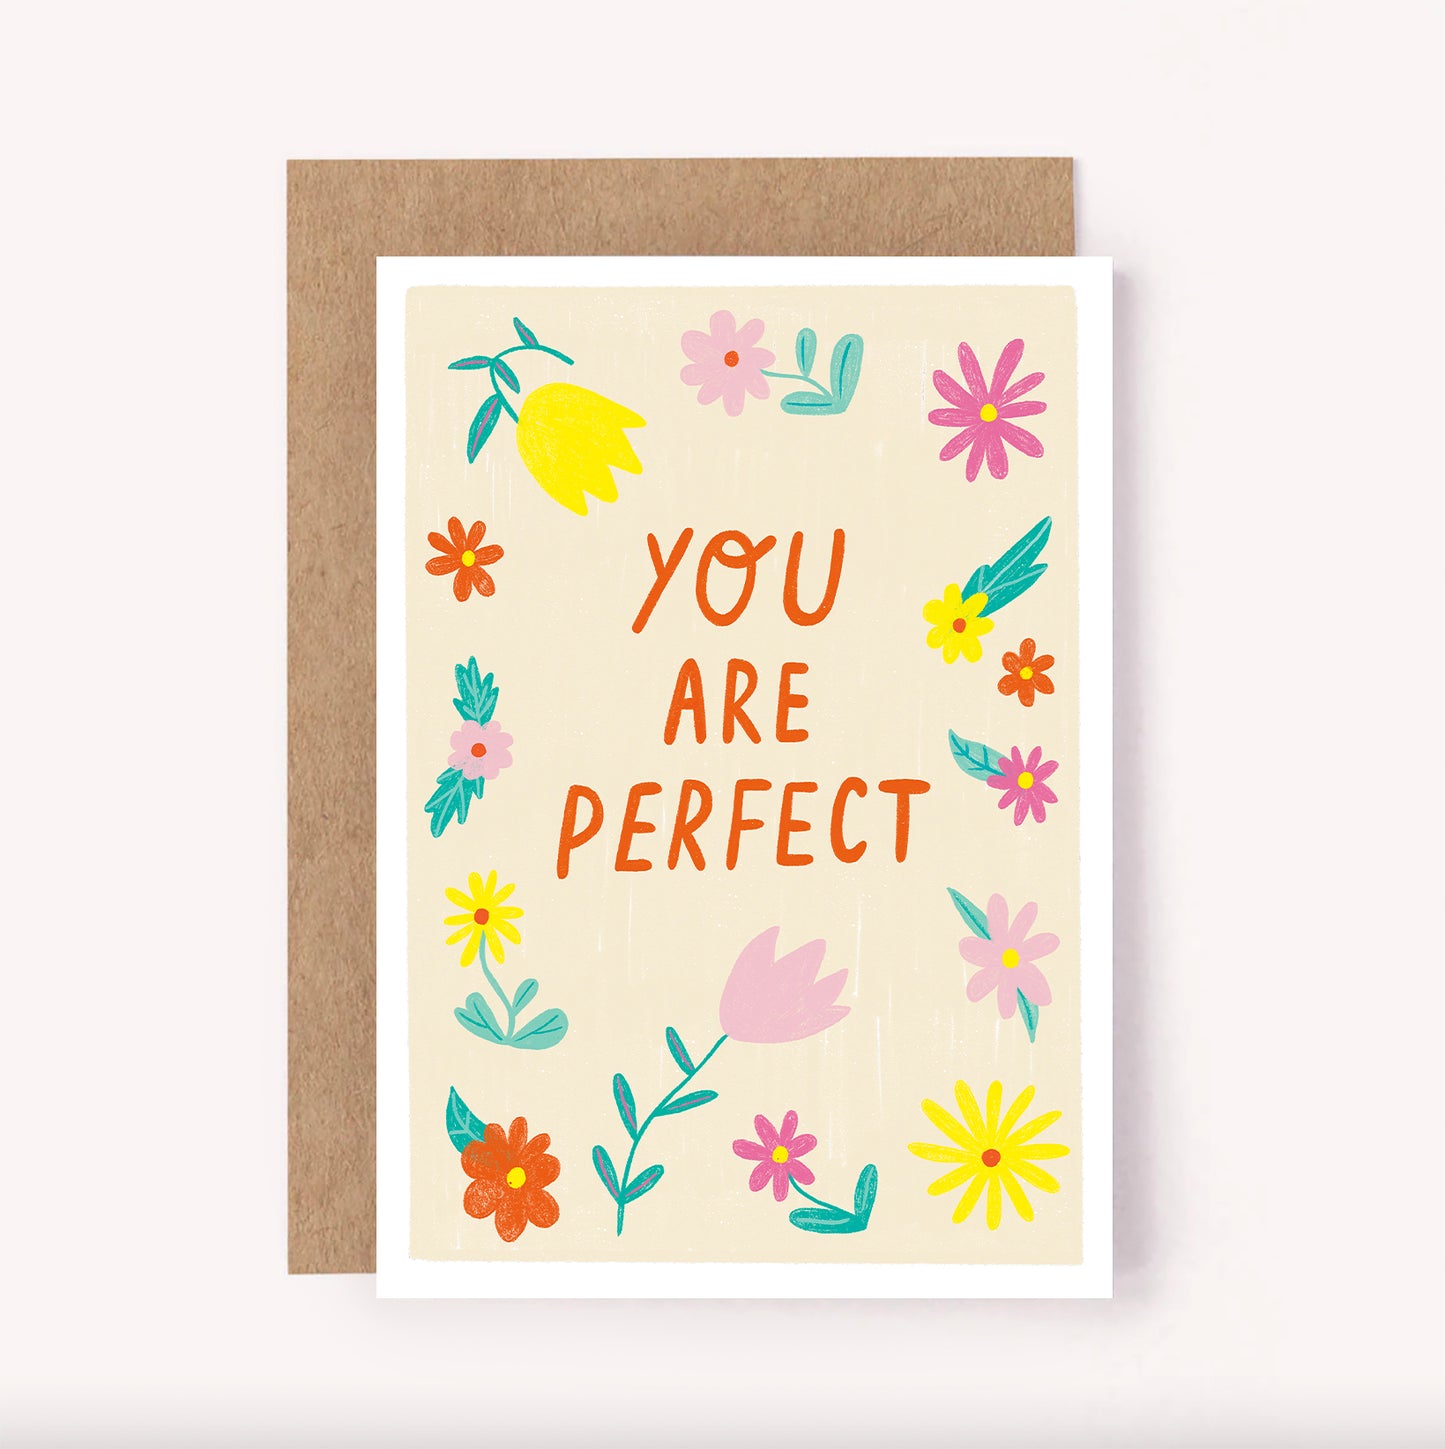 Hand-lettered "You Are Perfect" greeting card with colourful flowers set upon a beige background. This card is the perfect way to brighten someone's day, whether it is for an Anniversary or just because